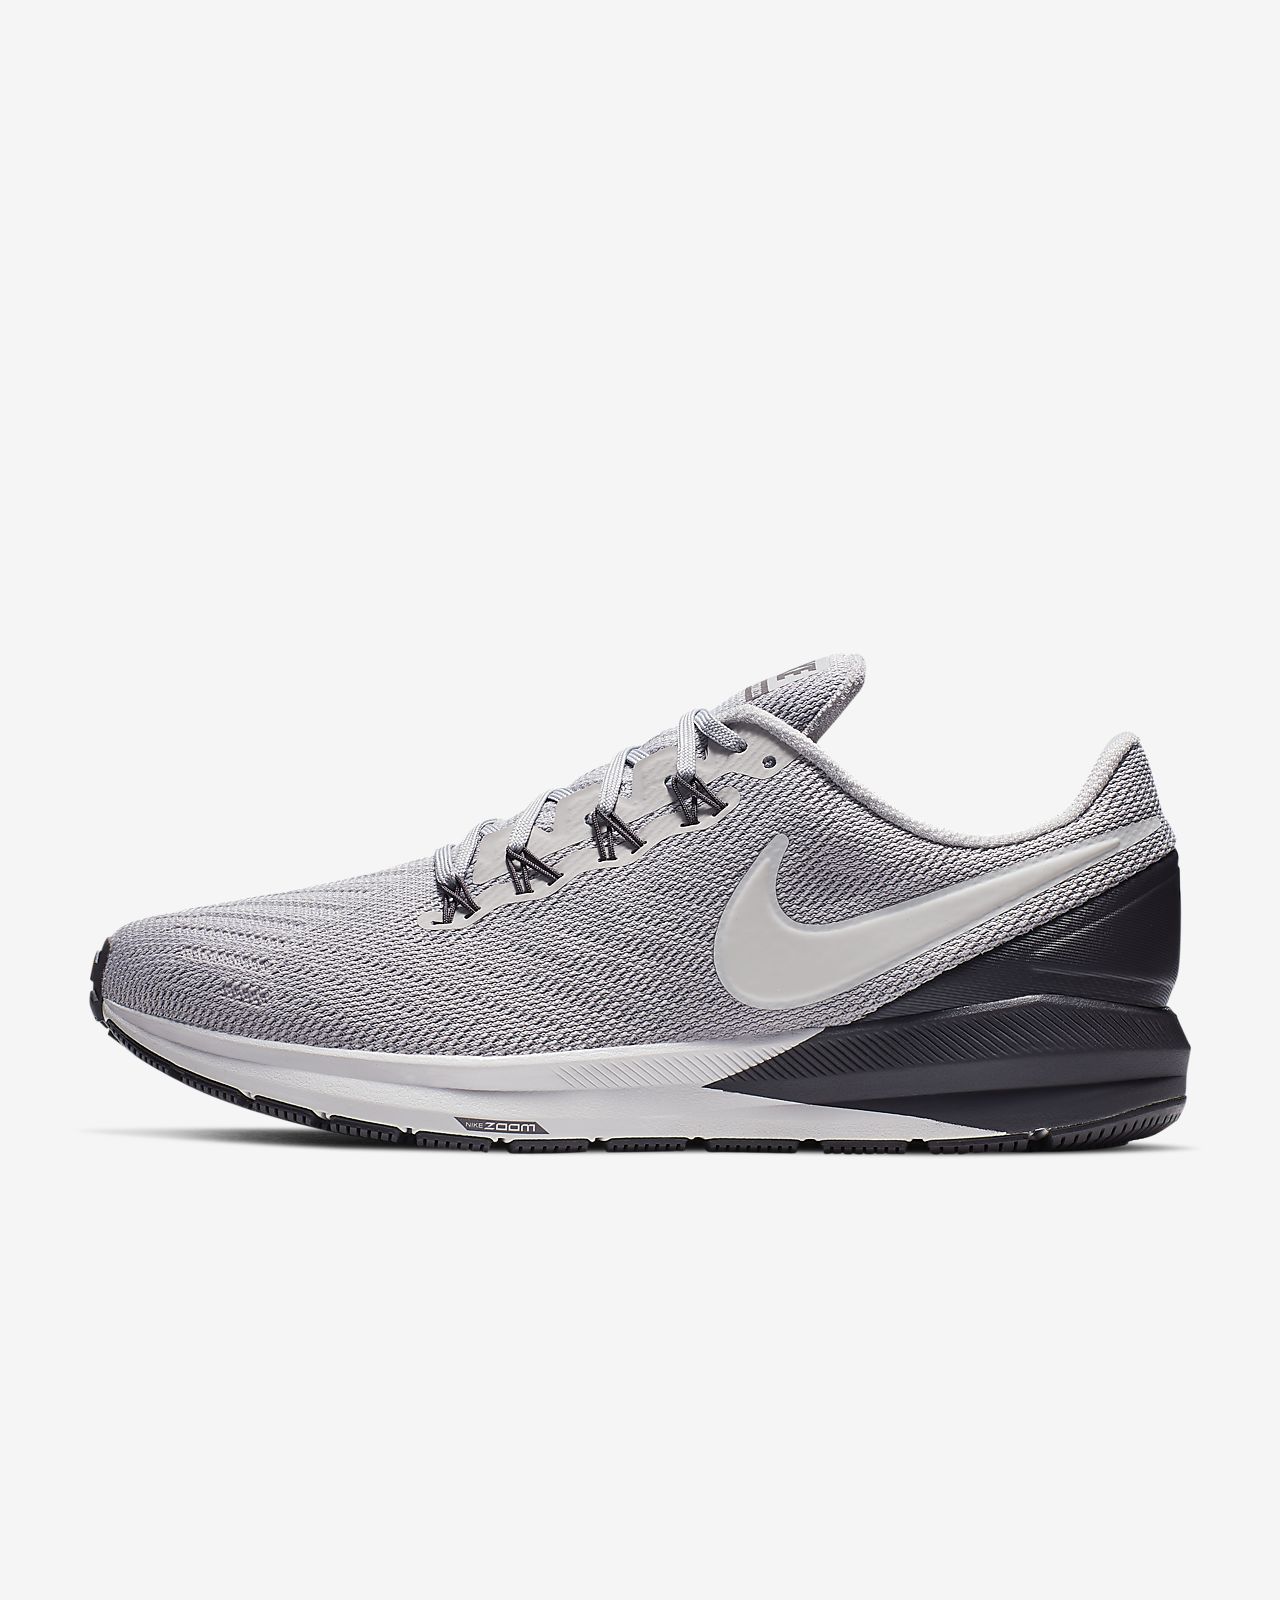 nike zoom shoes dynamic support